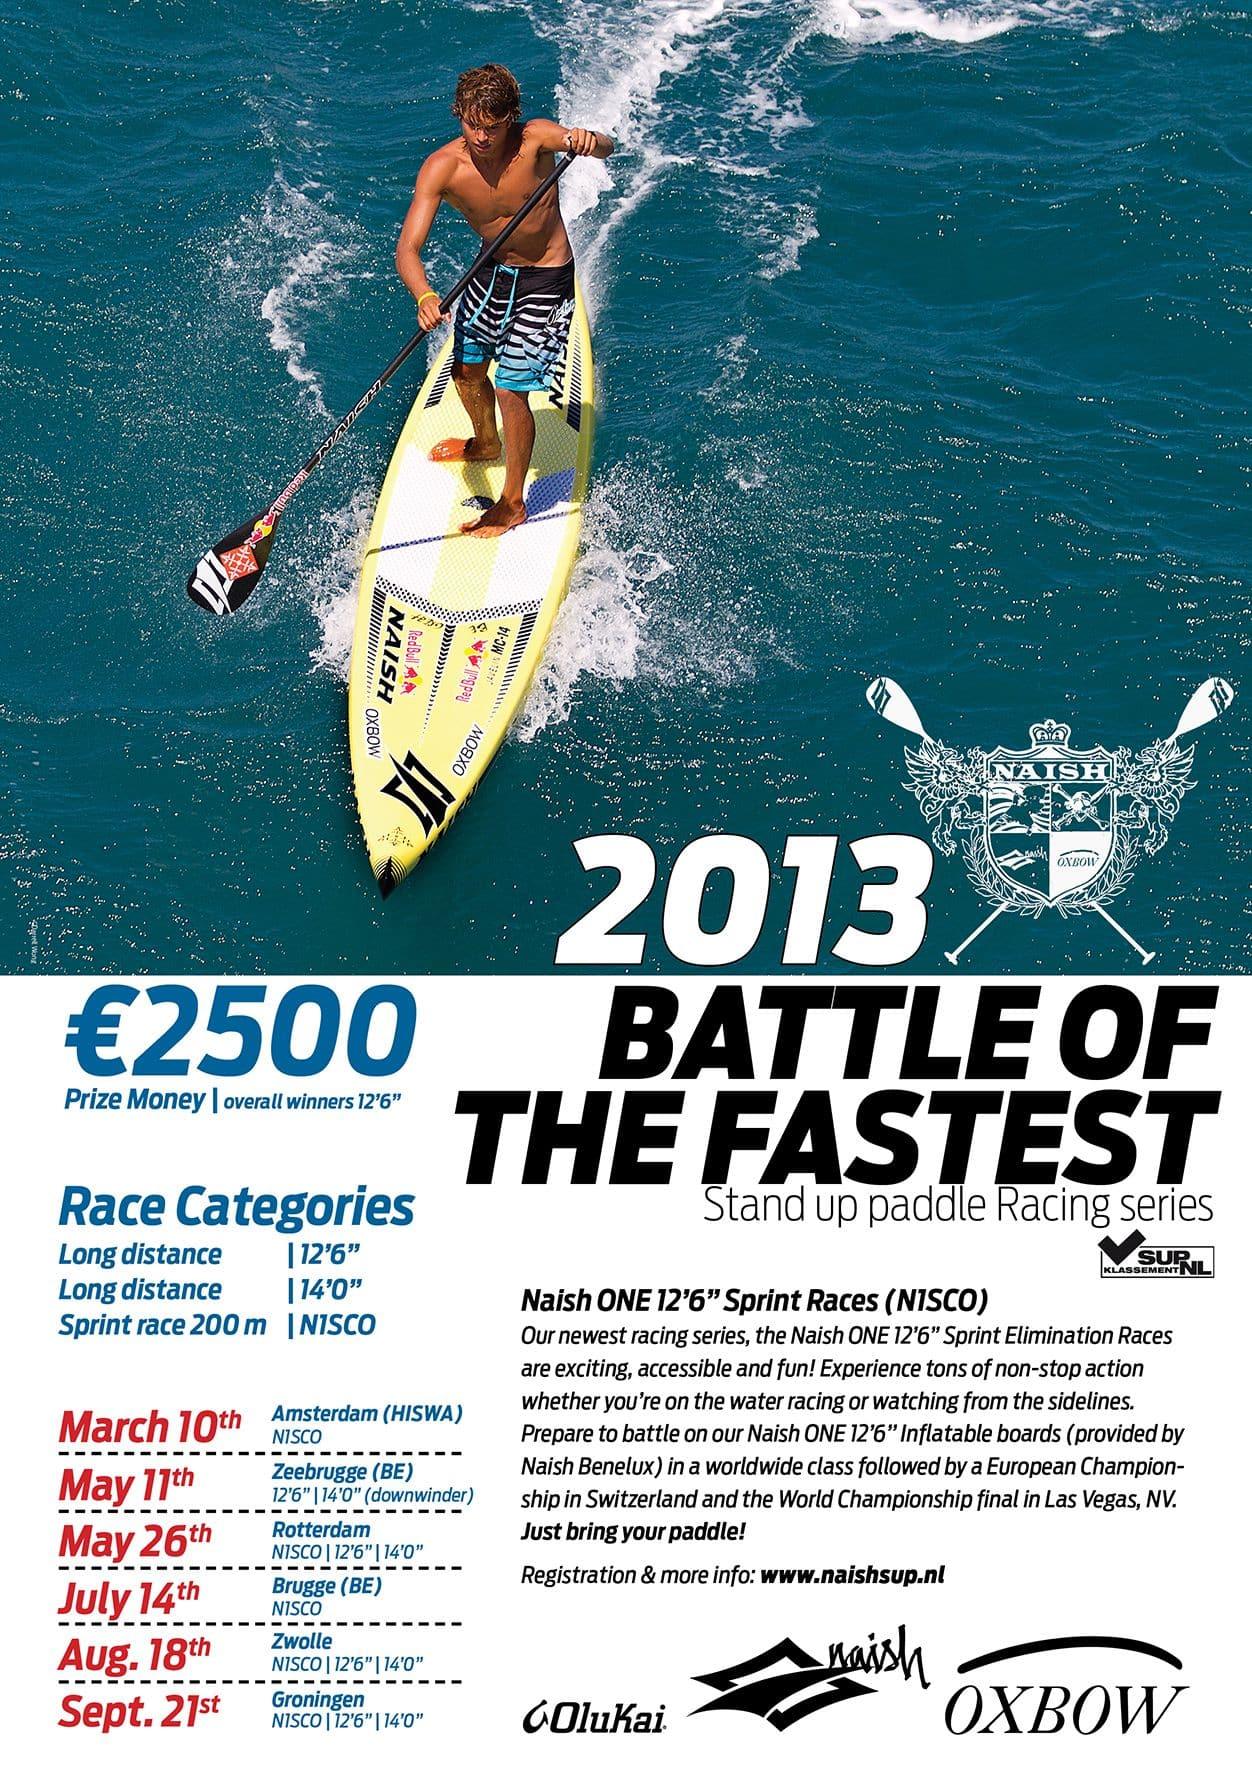 Naish’s “Battle of the Fastest 2013” kicks off this weekend in Holland - Naish.com